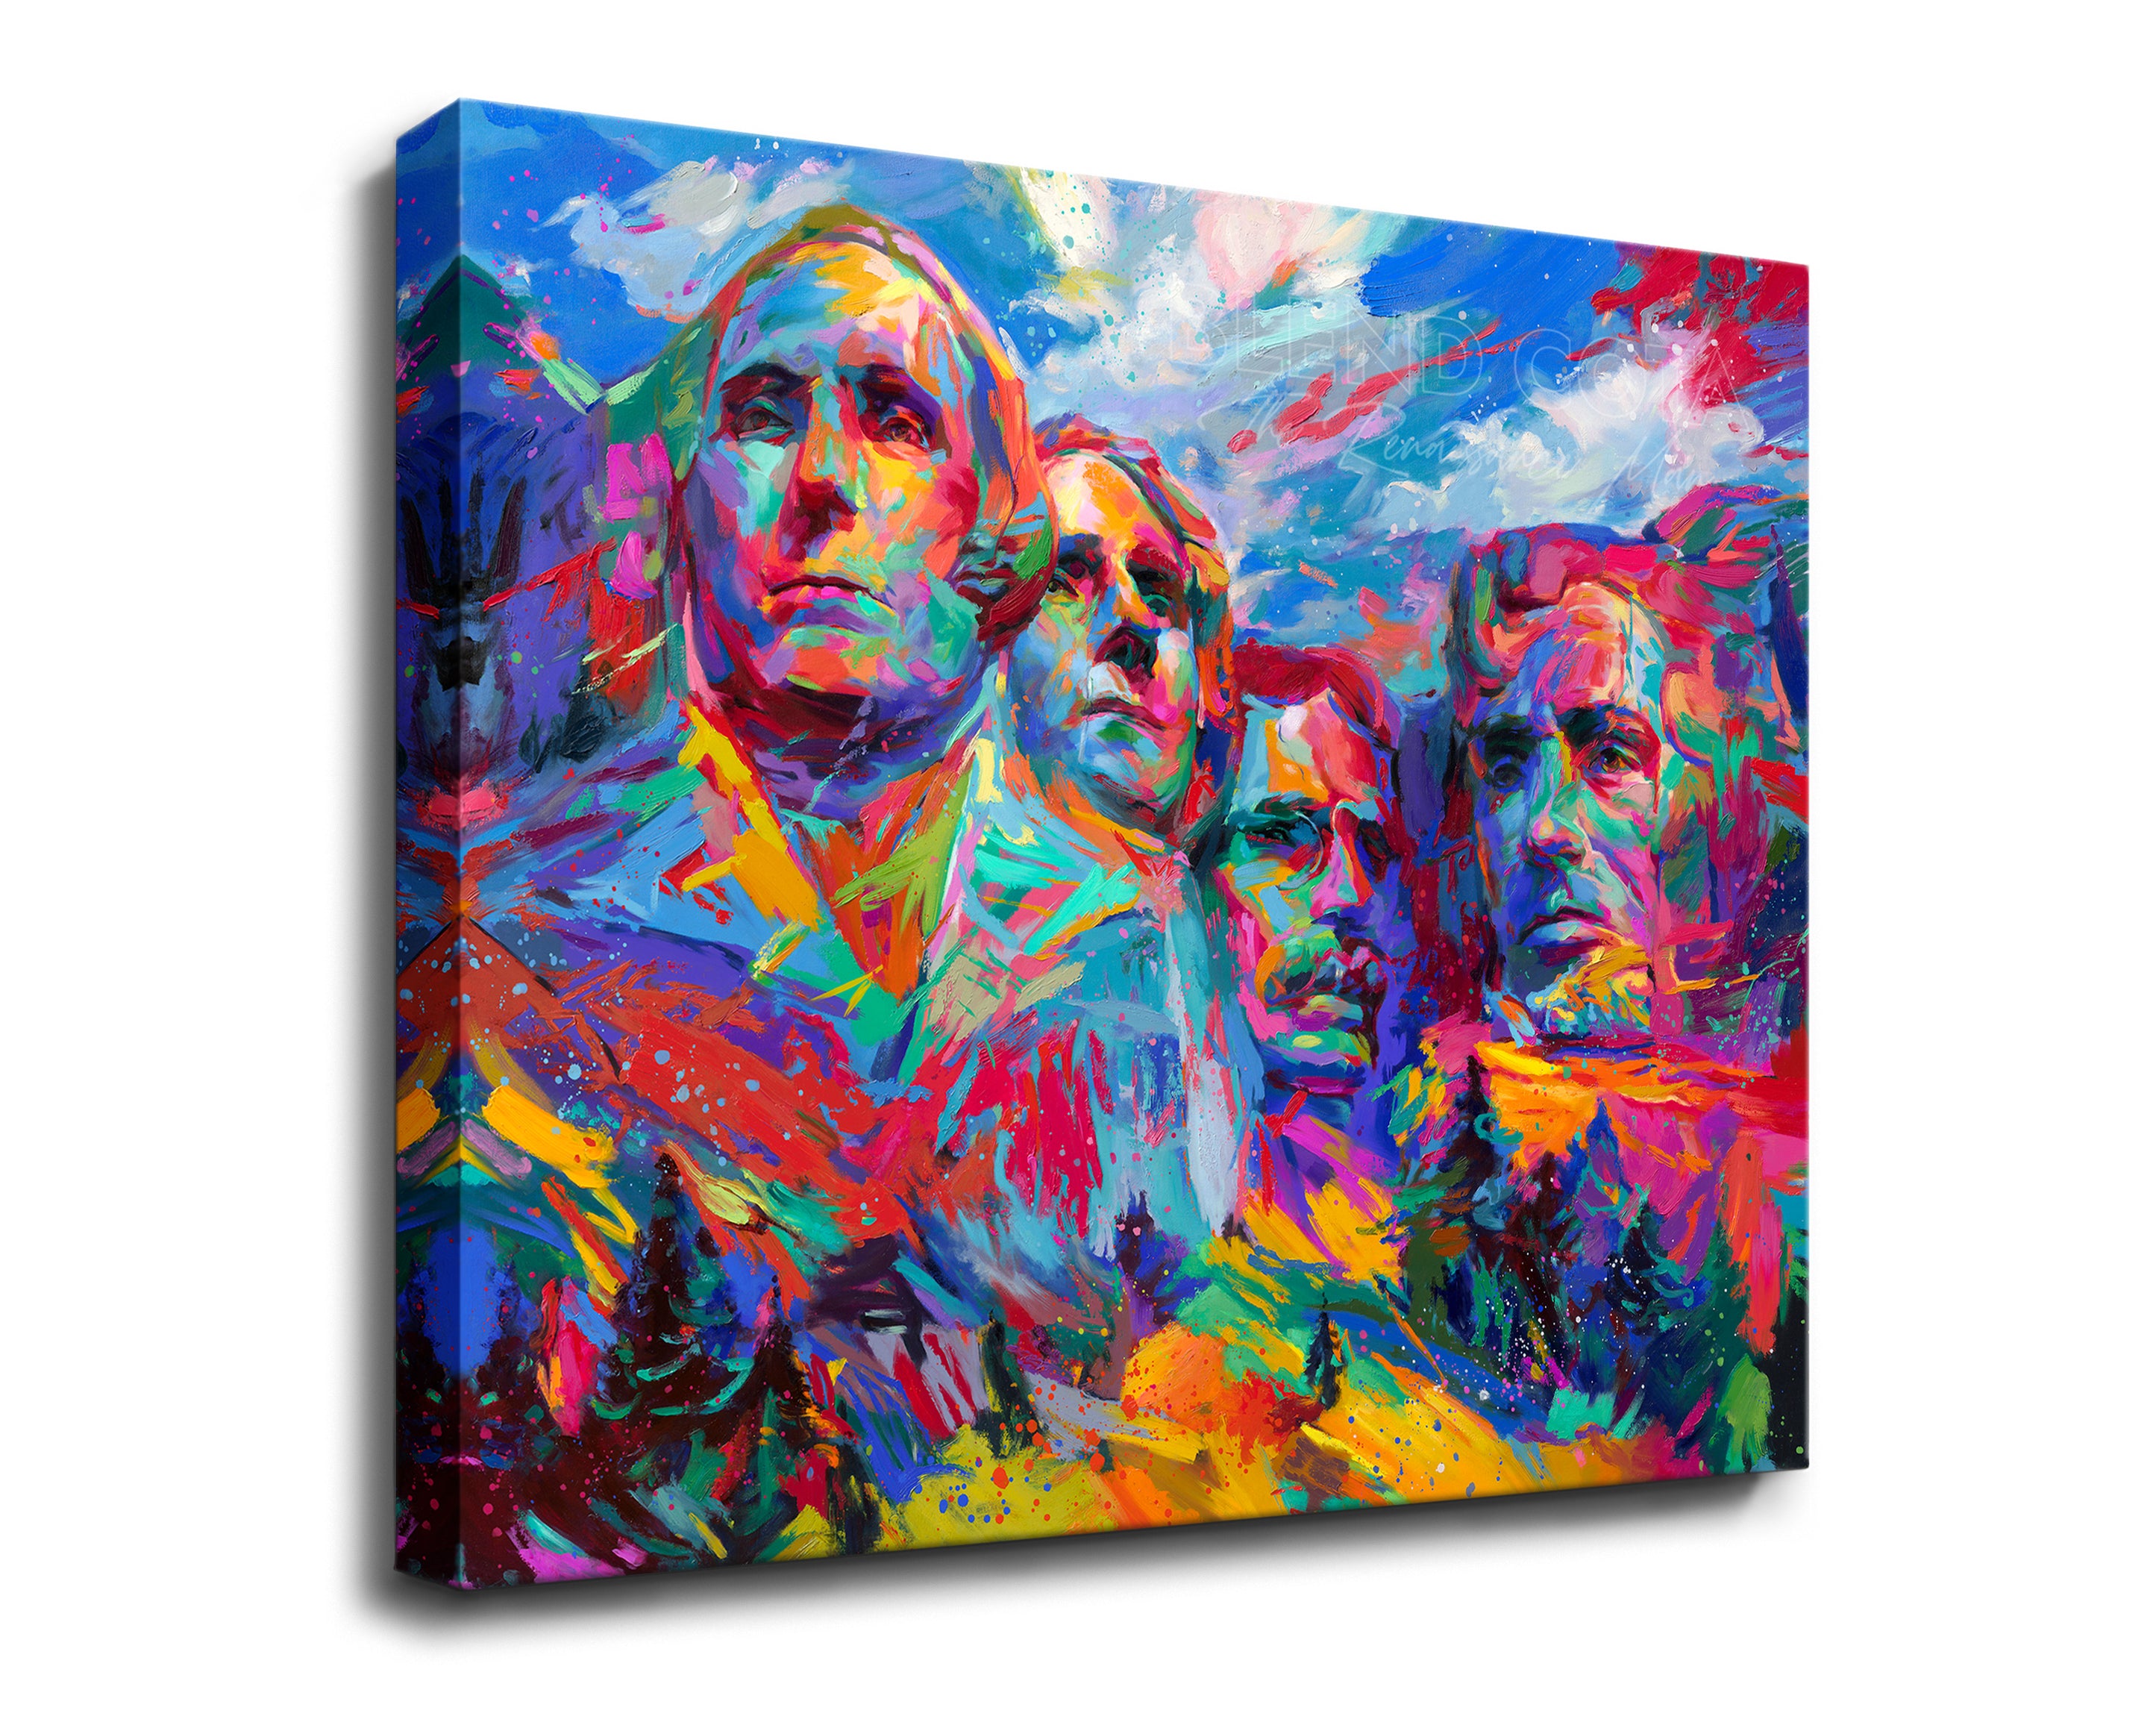 Mount Rushmore | Hope For a Brighter Future painted by Blend Cota Art Print on canvas from Blend Cota Studios